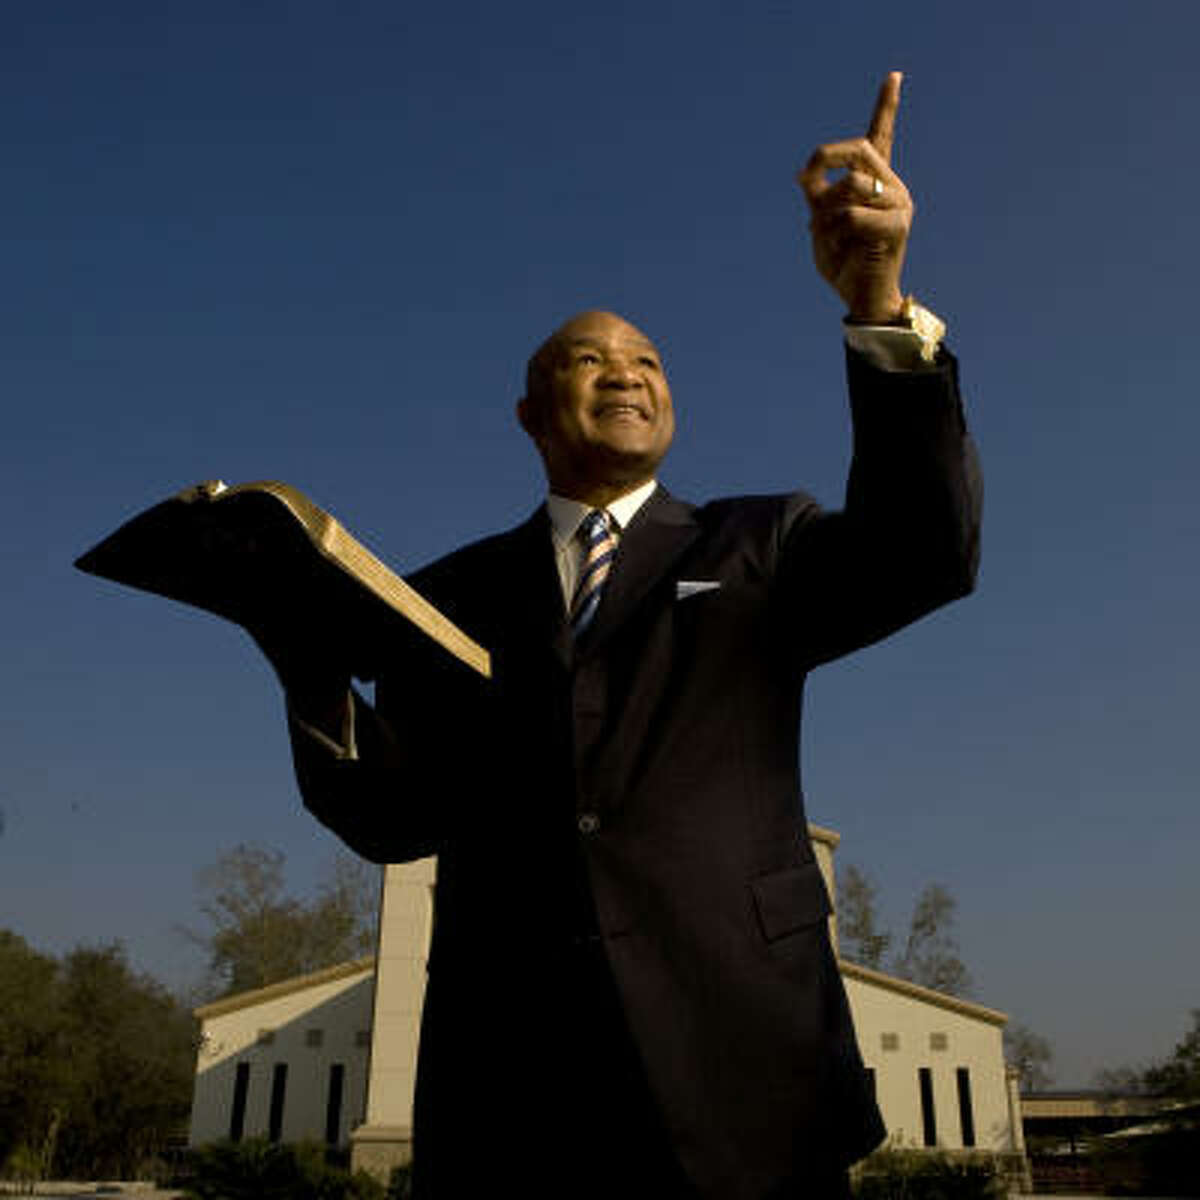 Pastor George Foreman, entrepreneur, Christian preacher and former professional boxer: In a world where so many are not able to dream and set goals; one must be ever thankful, for the great opportunity that the city, state and our country offers. My advice as an old boxer: Life is one big fight, get up every morning, saying to yourself ‘I can go one more round.’ Retreating is something you have proven you will not do. Earn so much so that you have to give, so that we make this fine city, state, country and the world better than we found it.